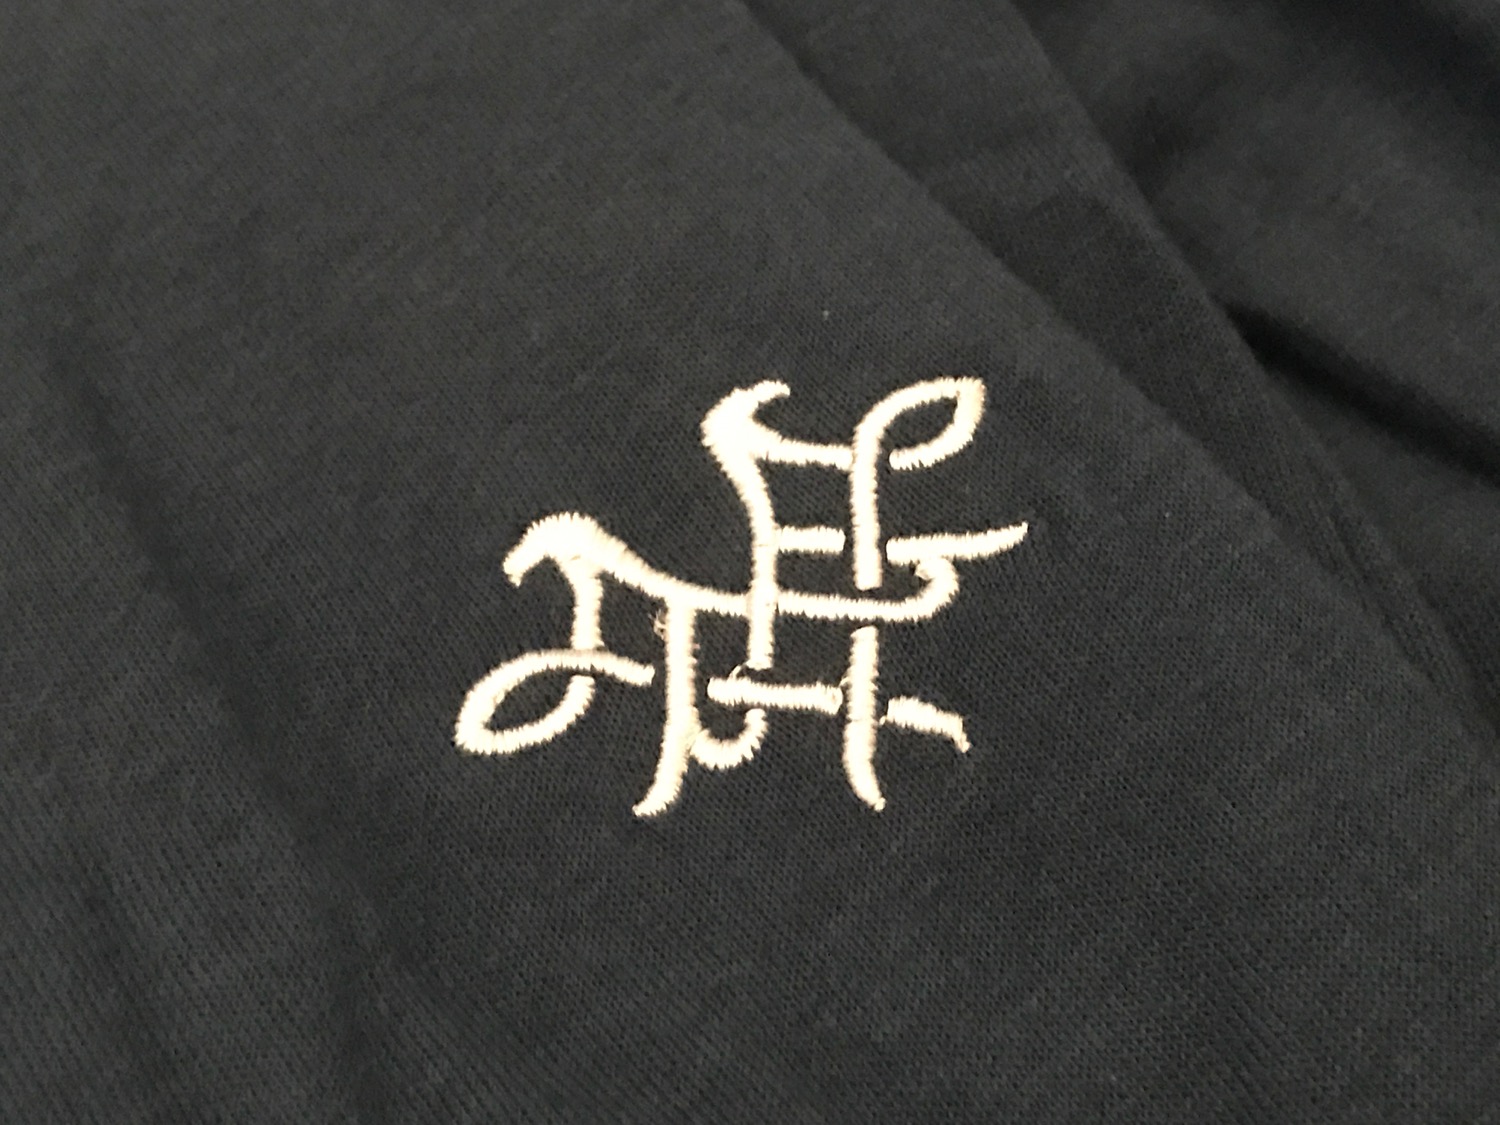 a black fabric with a white logo